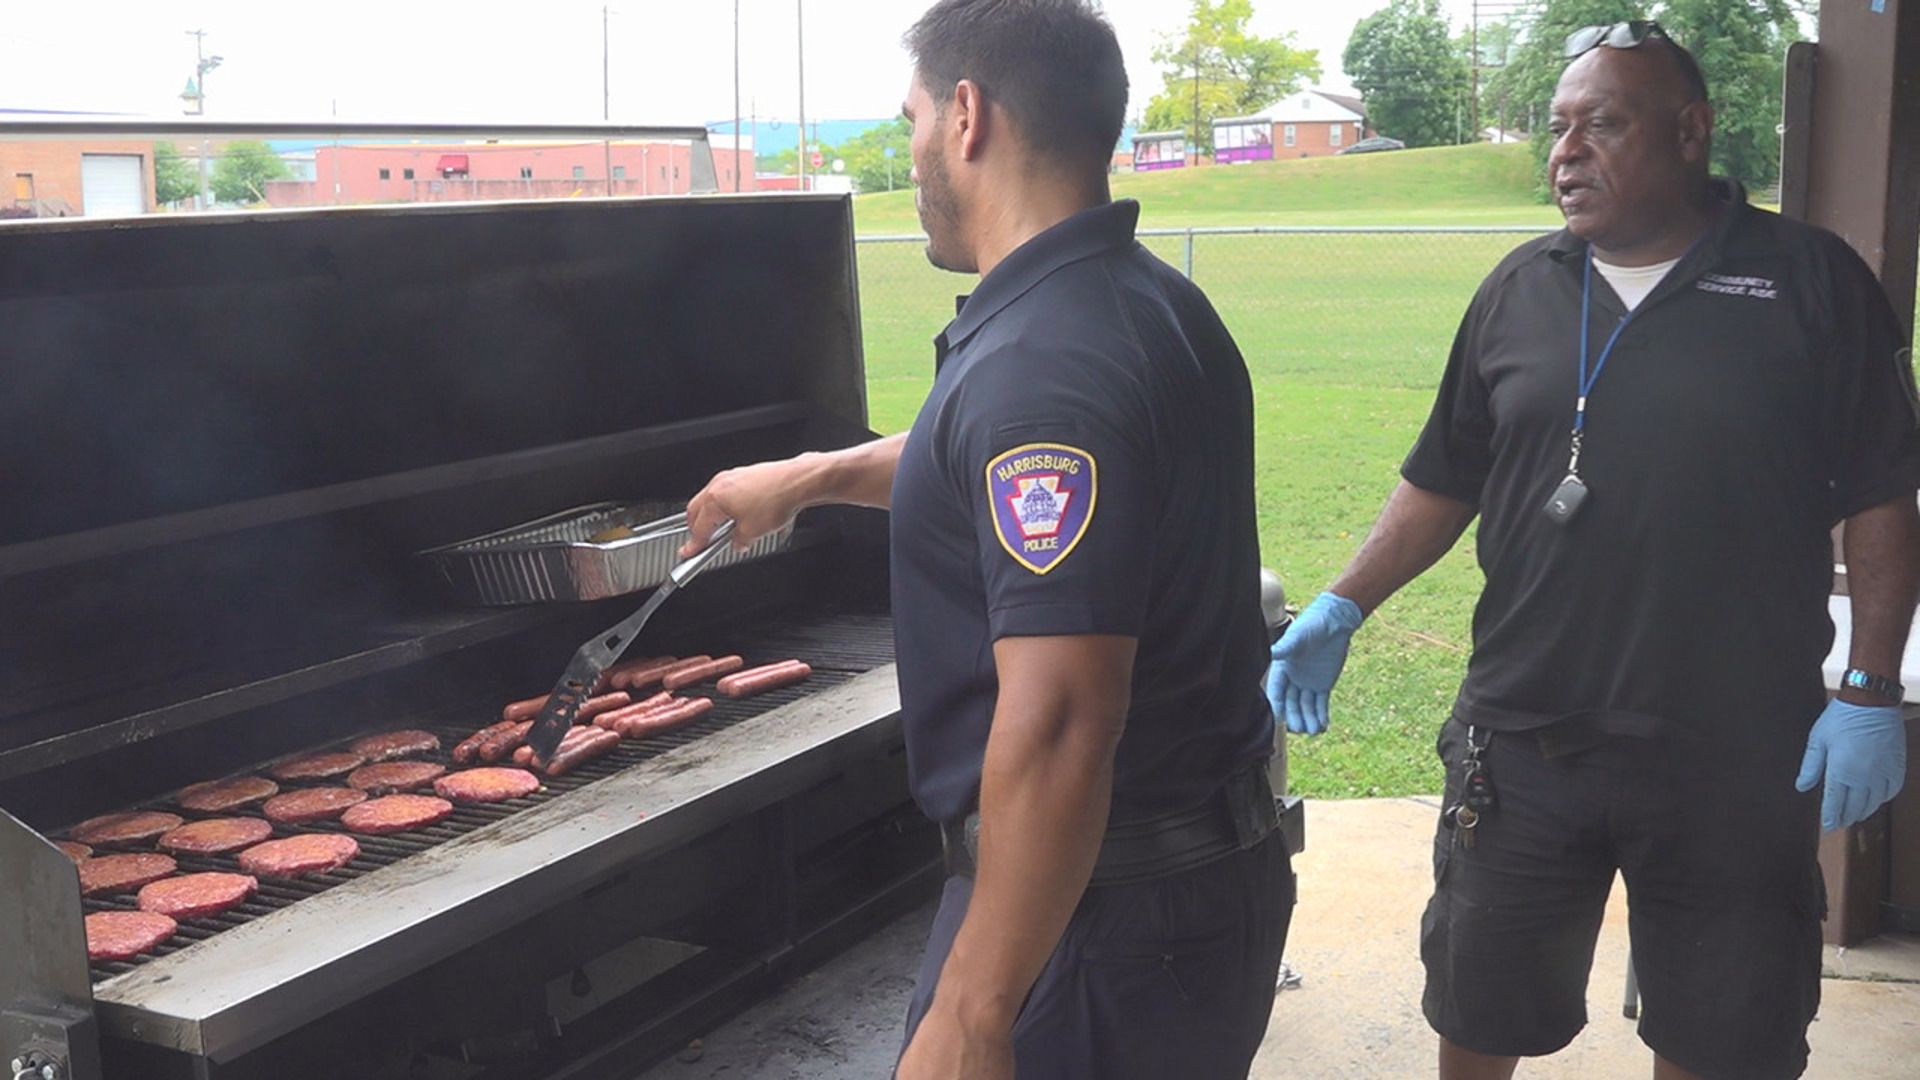 The cookout allowed community members and police to enjoy a meal together and continuing to build trust.